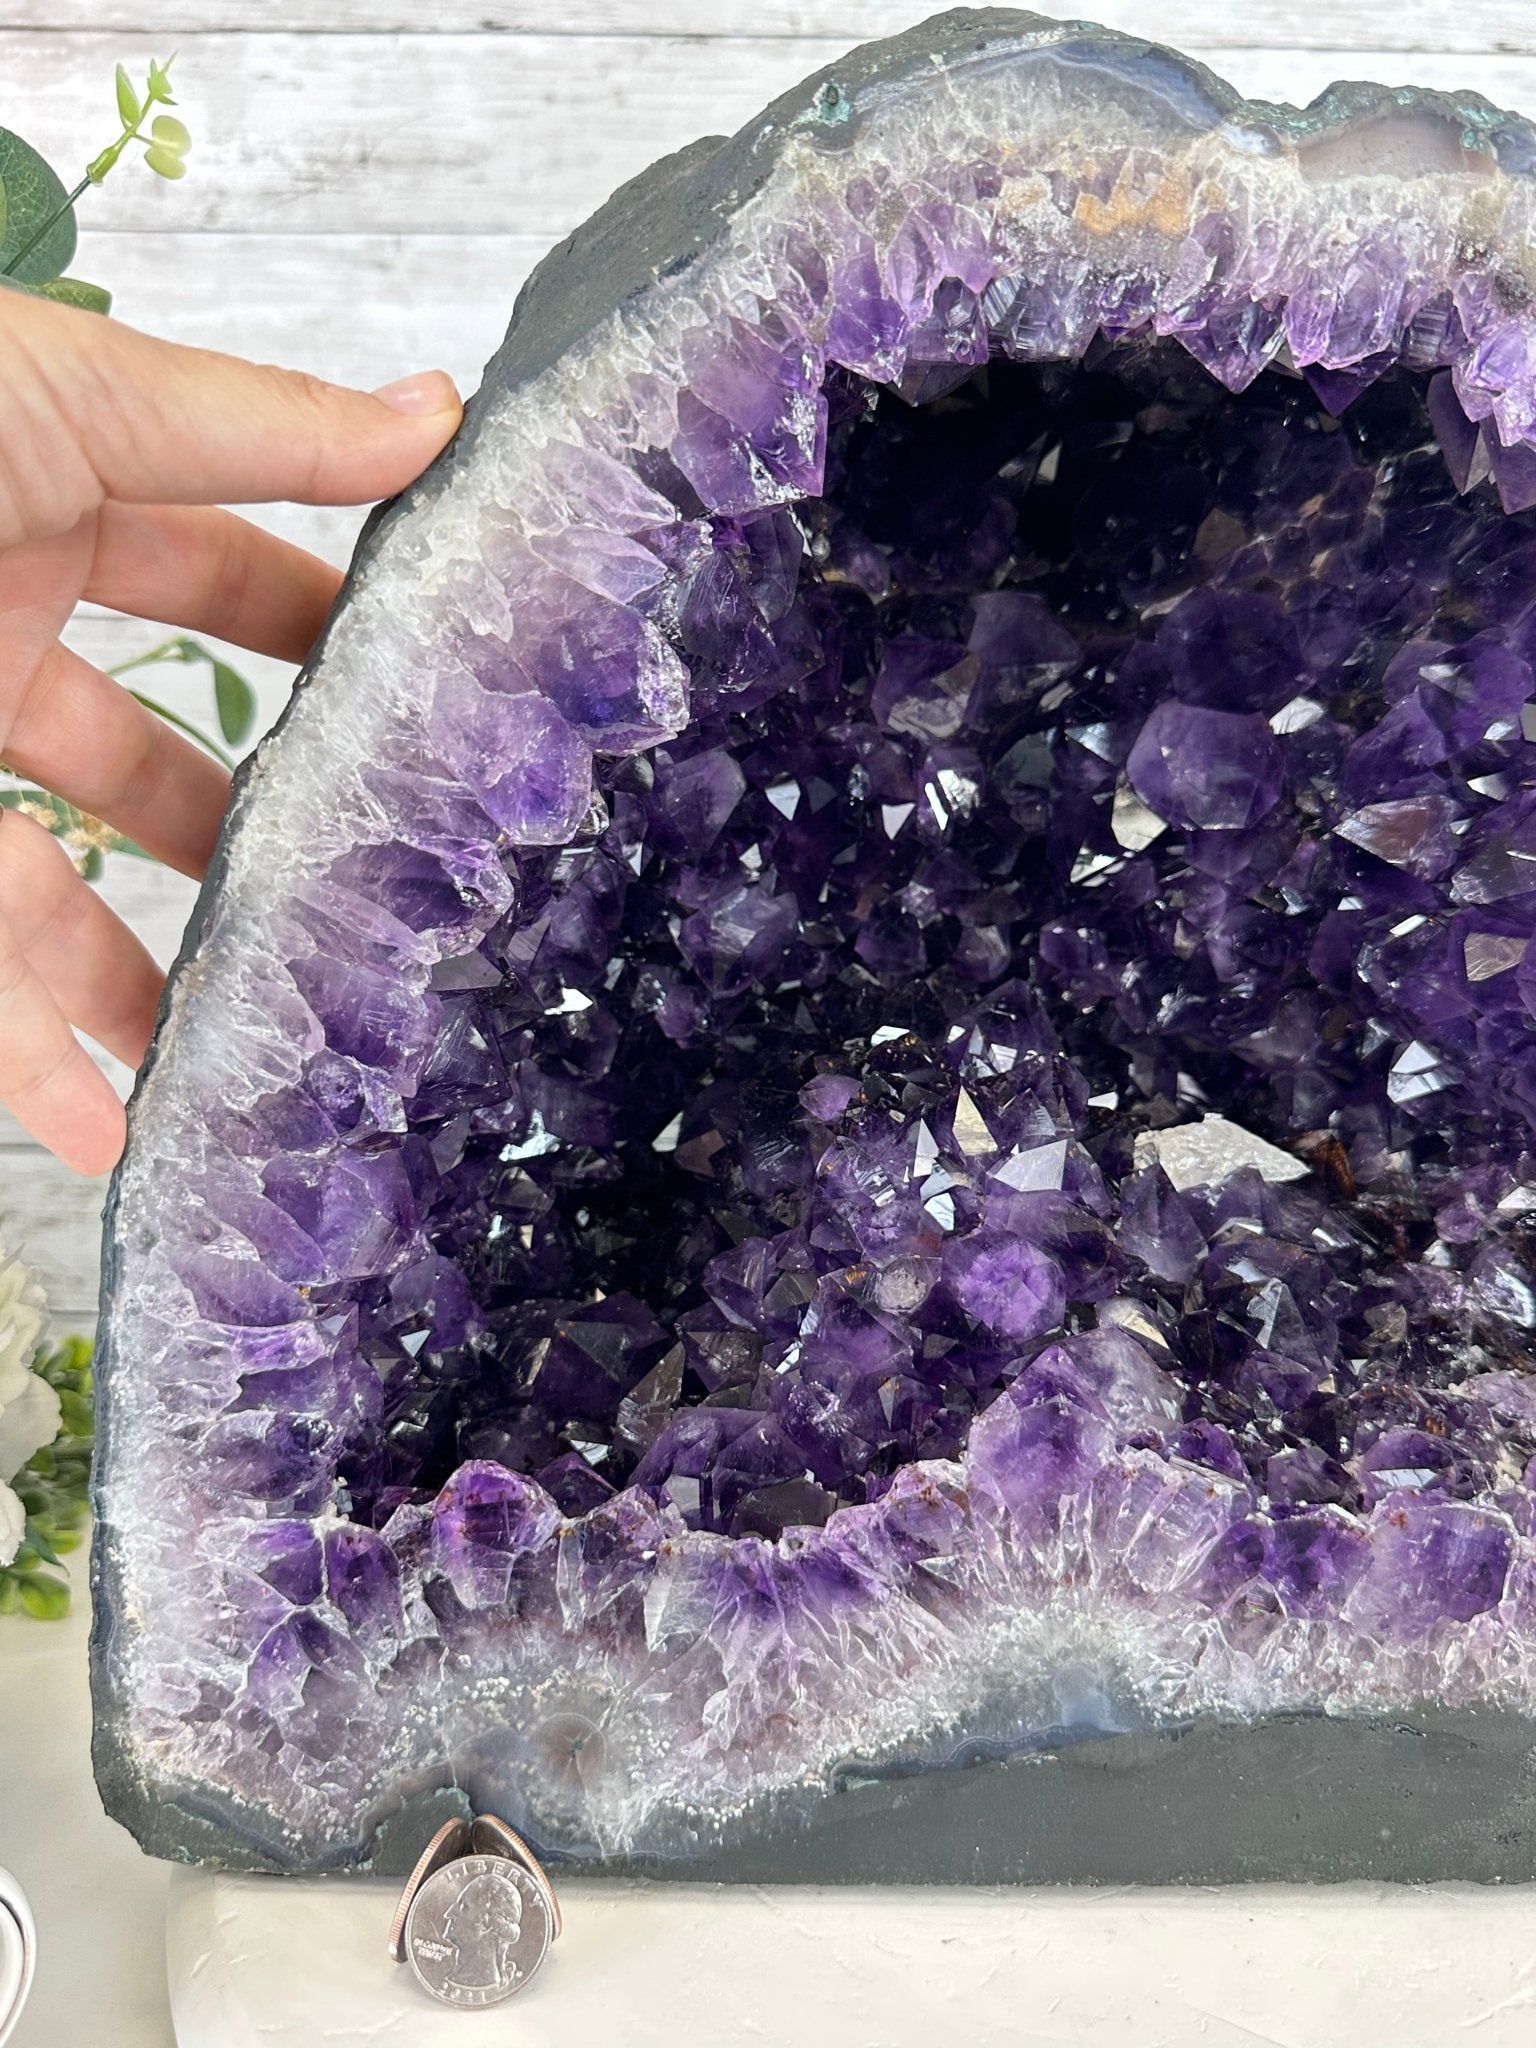 Extra Plus Quality Brazilian Amethyst Cathedral, 74.7 lbs & 13.5" Tall, Model #5601-0886 by Brazil Gems - Brazil GemsBrazil GemsExtra Plus Quality Brazilian Amethyst Cathedral, 74.7 lbs & 13.5" Tall, Model #5601-0886 by Brazil GemsCathedrals5601-0886